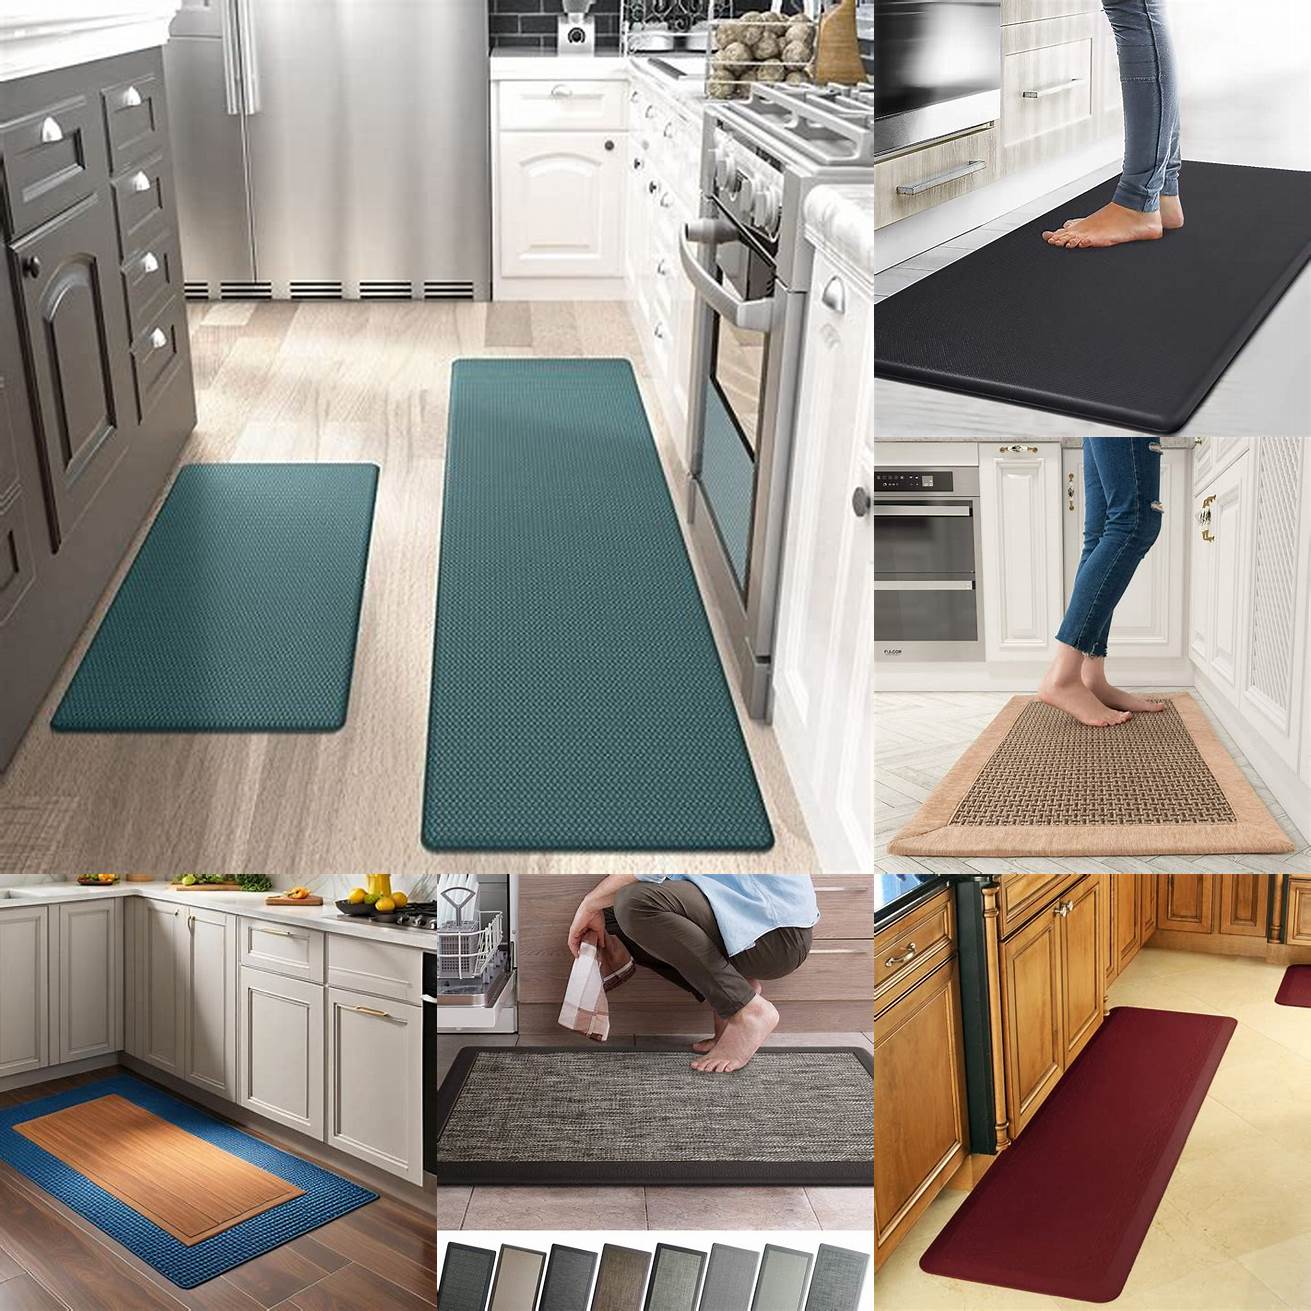 3 Protects Floors Kitchen mats protect your floors from scratches stains and spills They also prevent heavy objects from damaging your floors